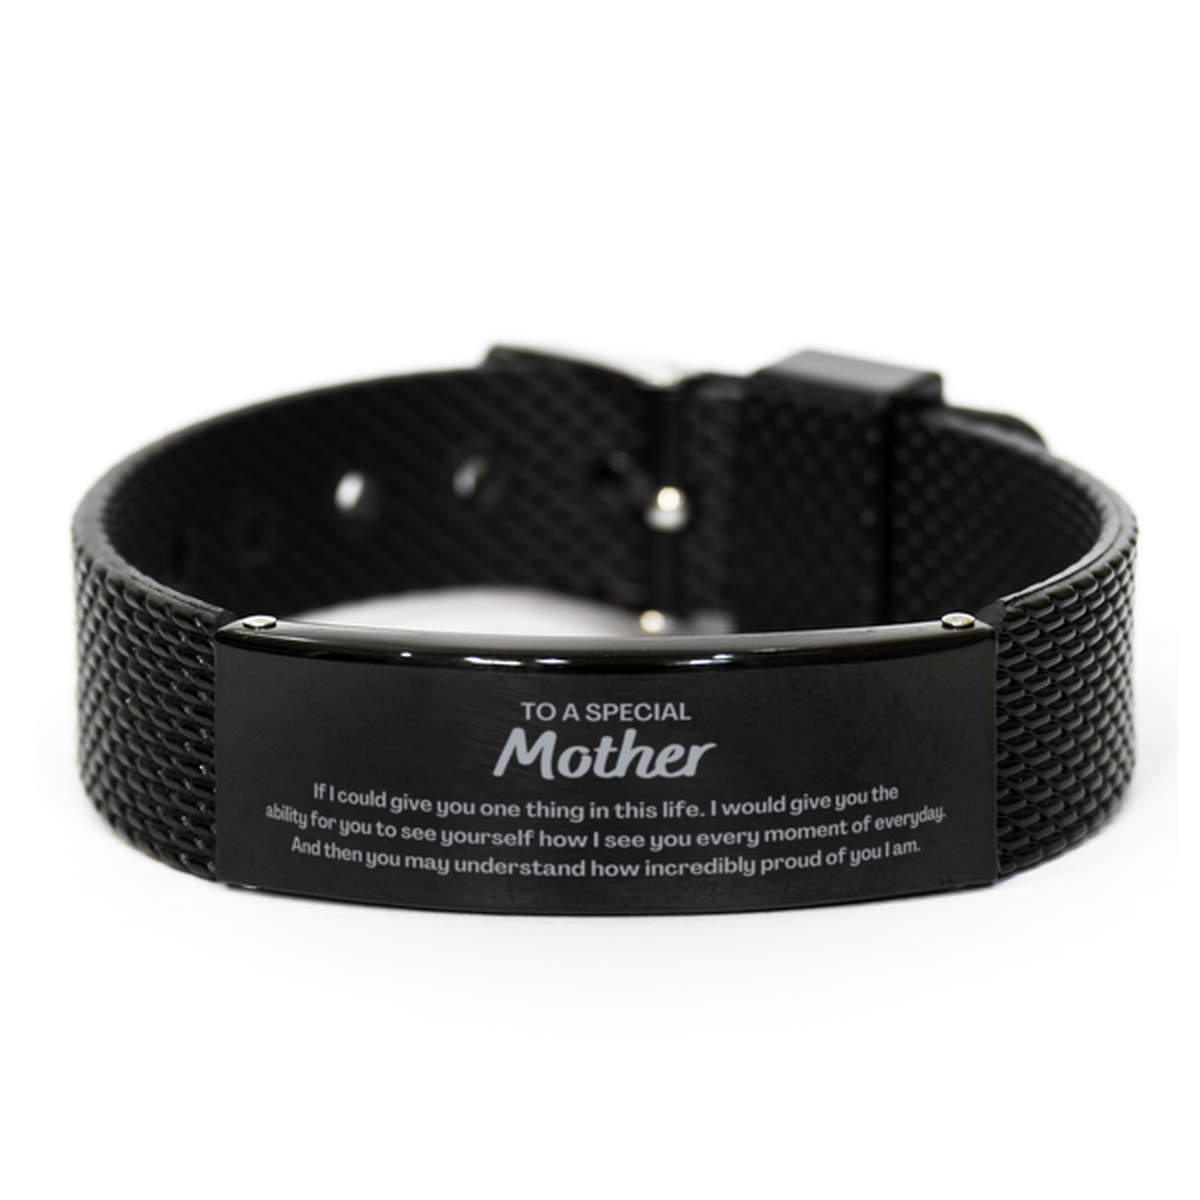 To My Mother Black Shark Mesh Bracelet, Gifts For Mother Engraved, Inspirational Gifts for Christmas Birthday, Epic Gifts for Mother To A Special Mother how incredibly proud of you I am